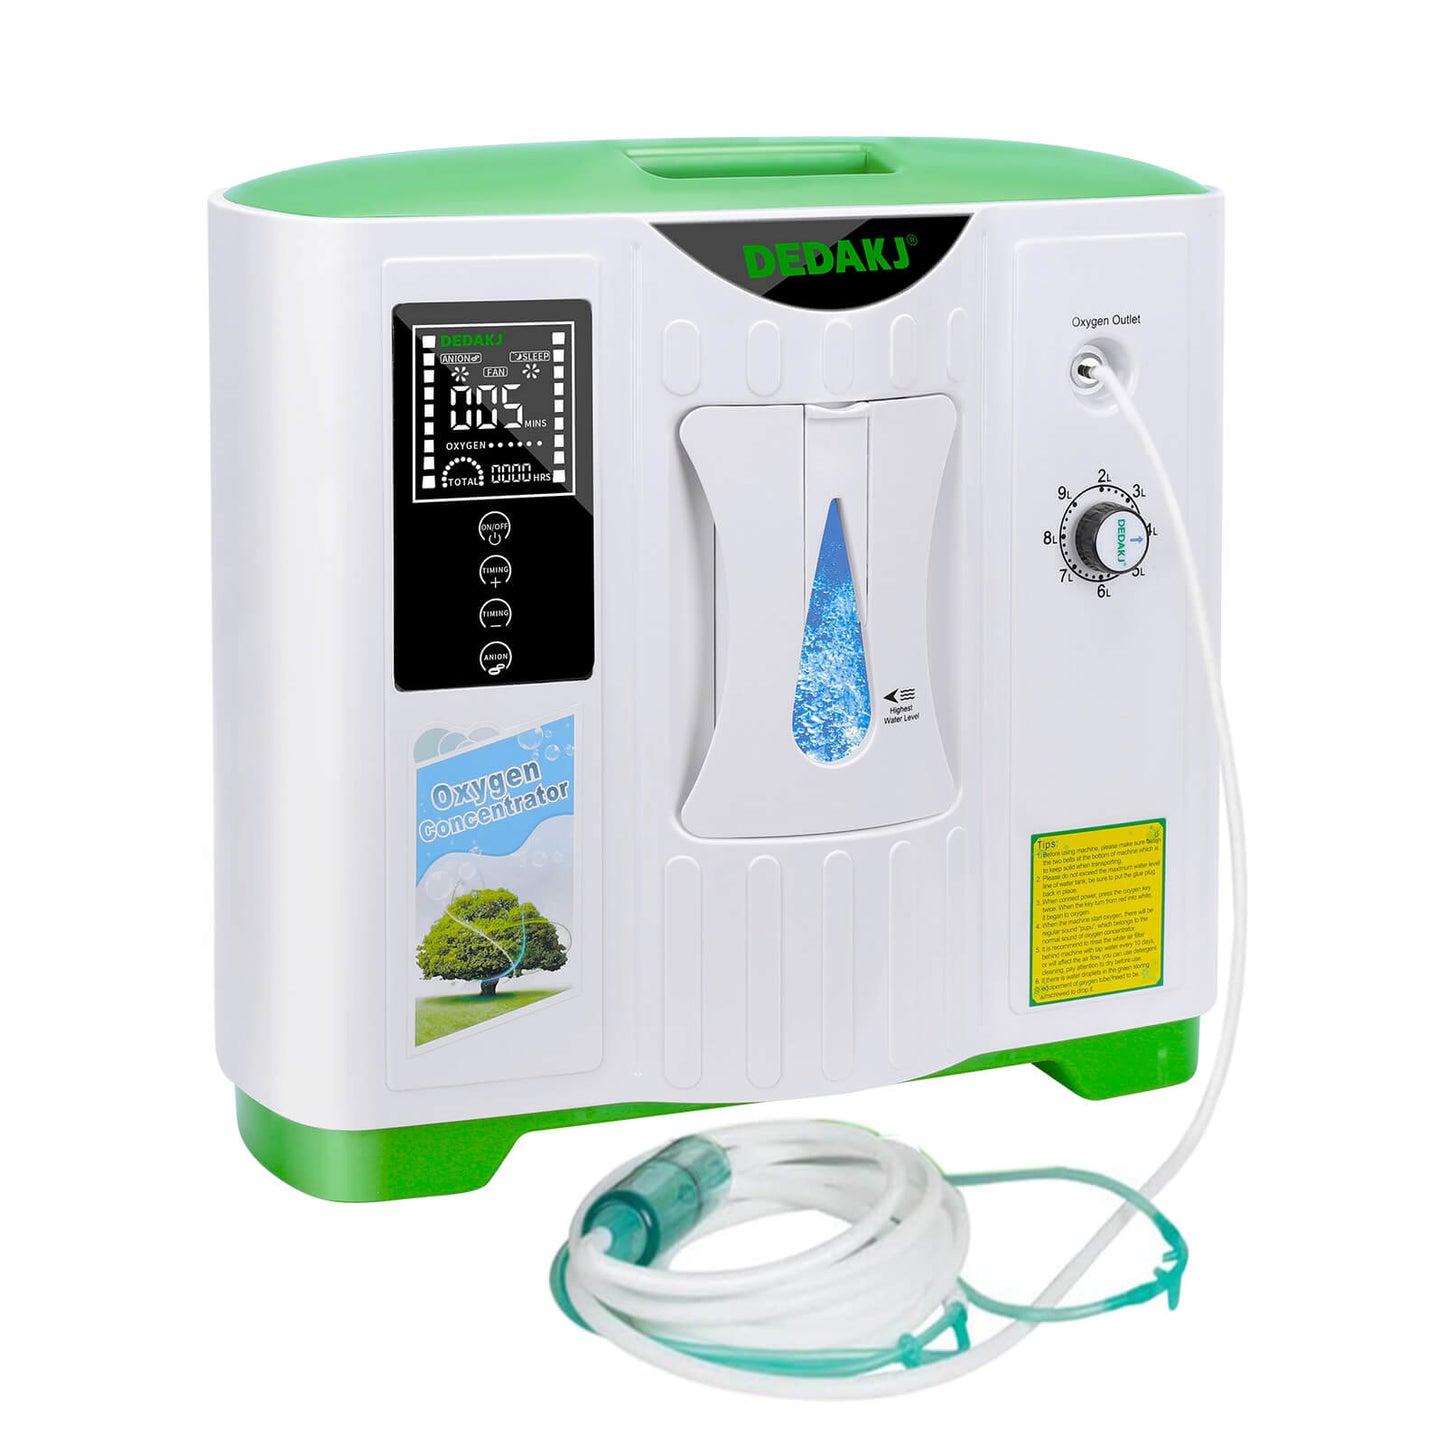 Buy 9 Liter Household Oxygen Concentrator DEDAKJ O2 Maker Machine Continuous Flow Portable Oxygen Concentrator Maquina De Oxigenoterapia Low Price in USA Canada